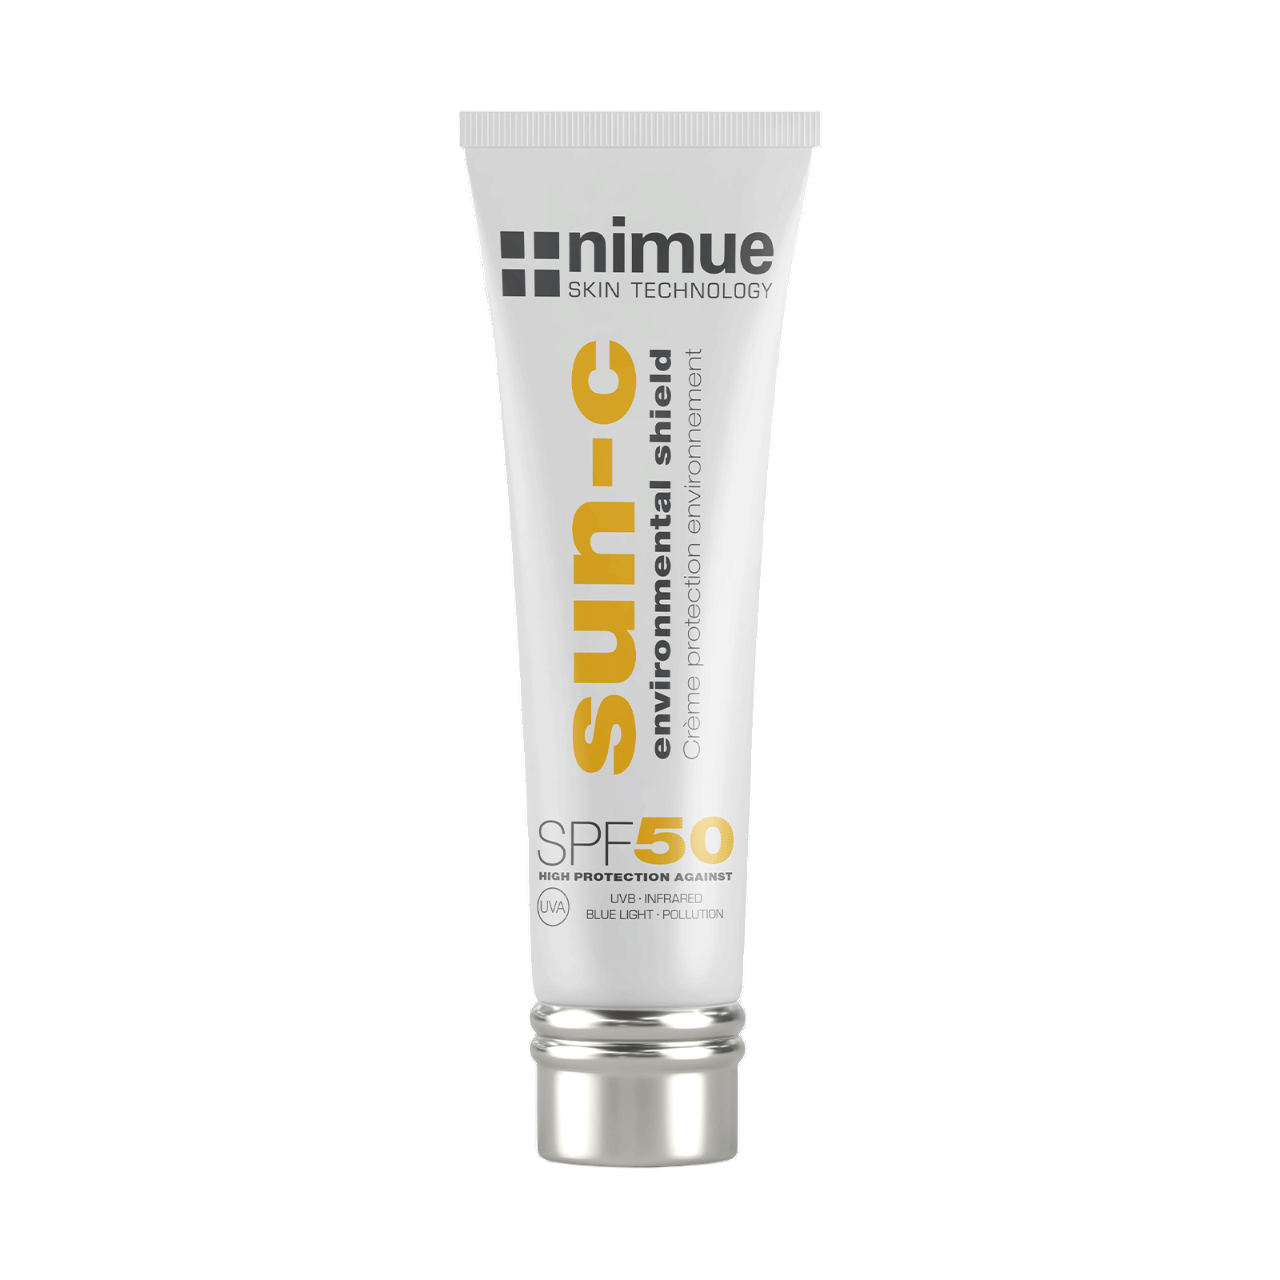 Protect your skin with Nimue - Sun-C Environmental Shield SPF 50 50ml cream.